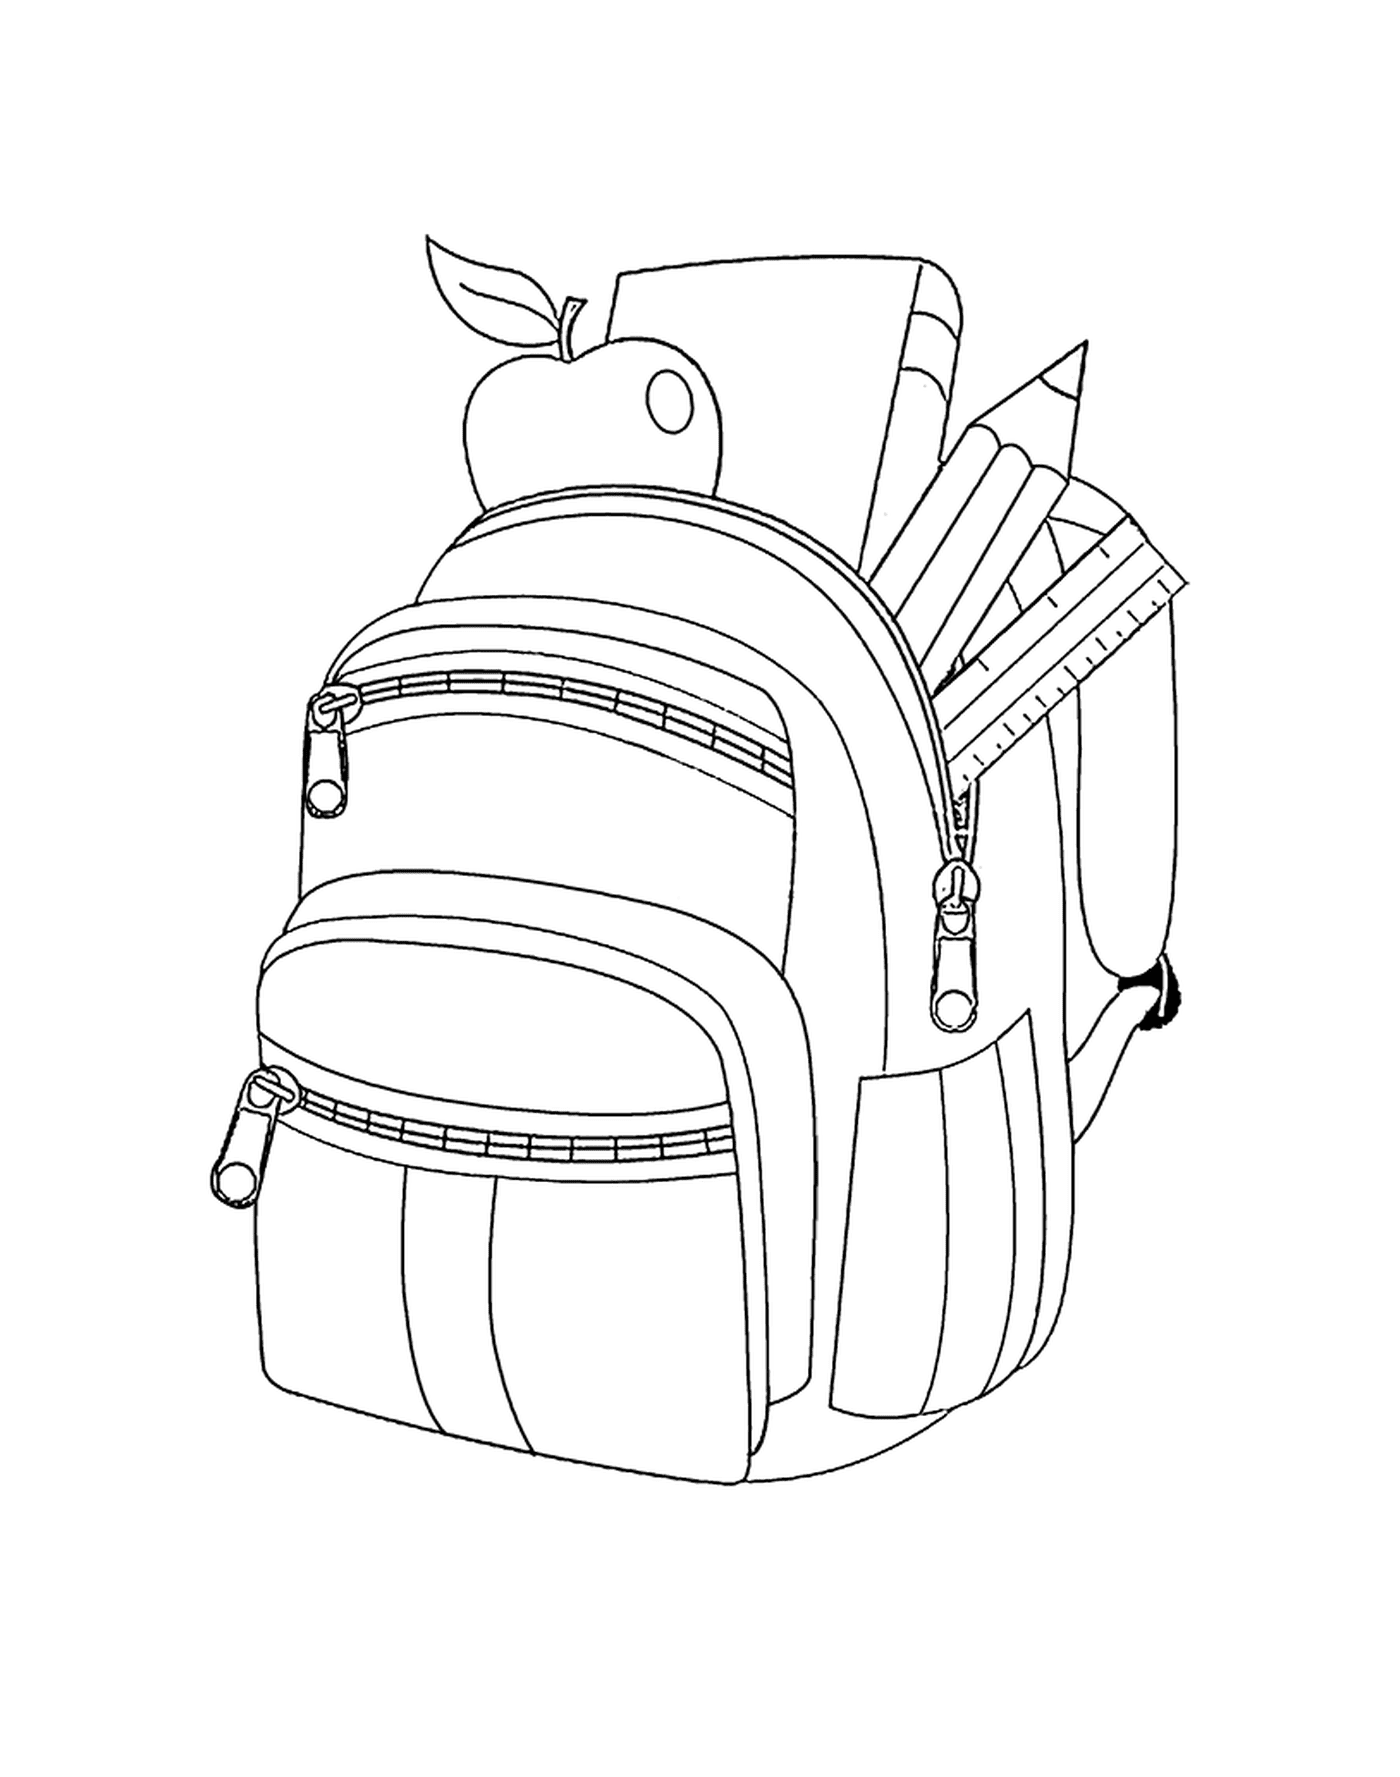  A backpack with pencils and an apple 